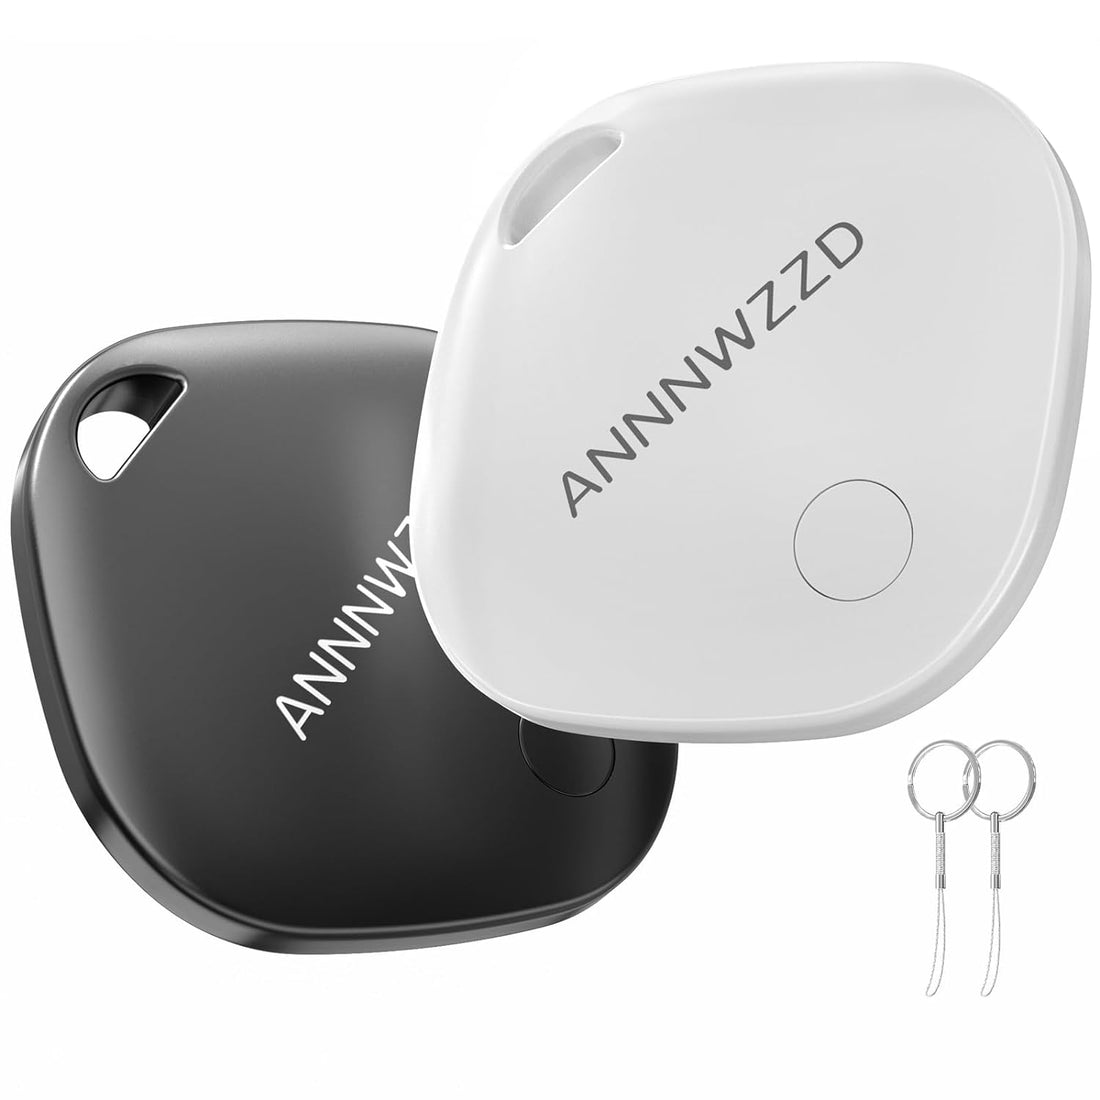 ANNNWZZD Bluetooth Tracker 2 Pack，Keys Finder and Luggage Tracker with Apple Find My (iOS Only) and Item Locator for Keys, Bags, Wallets, Anti-Lost and More